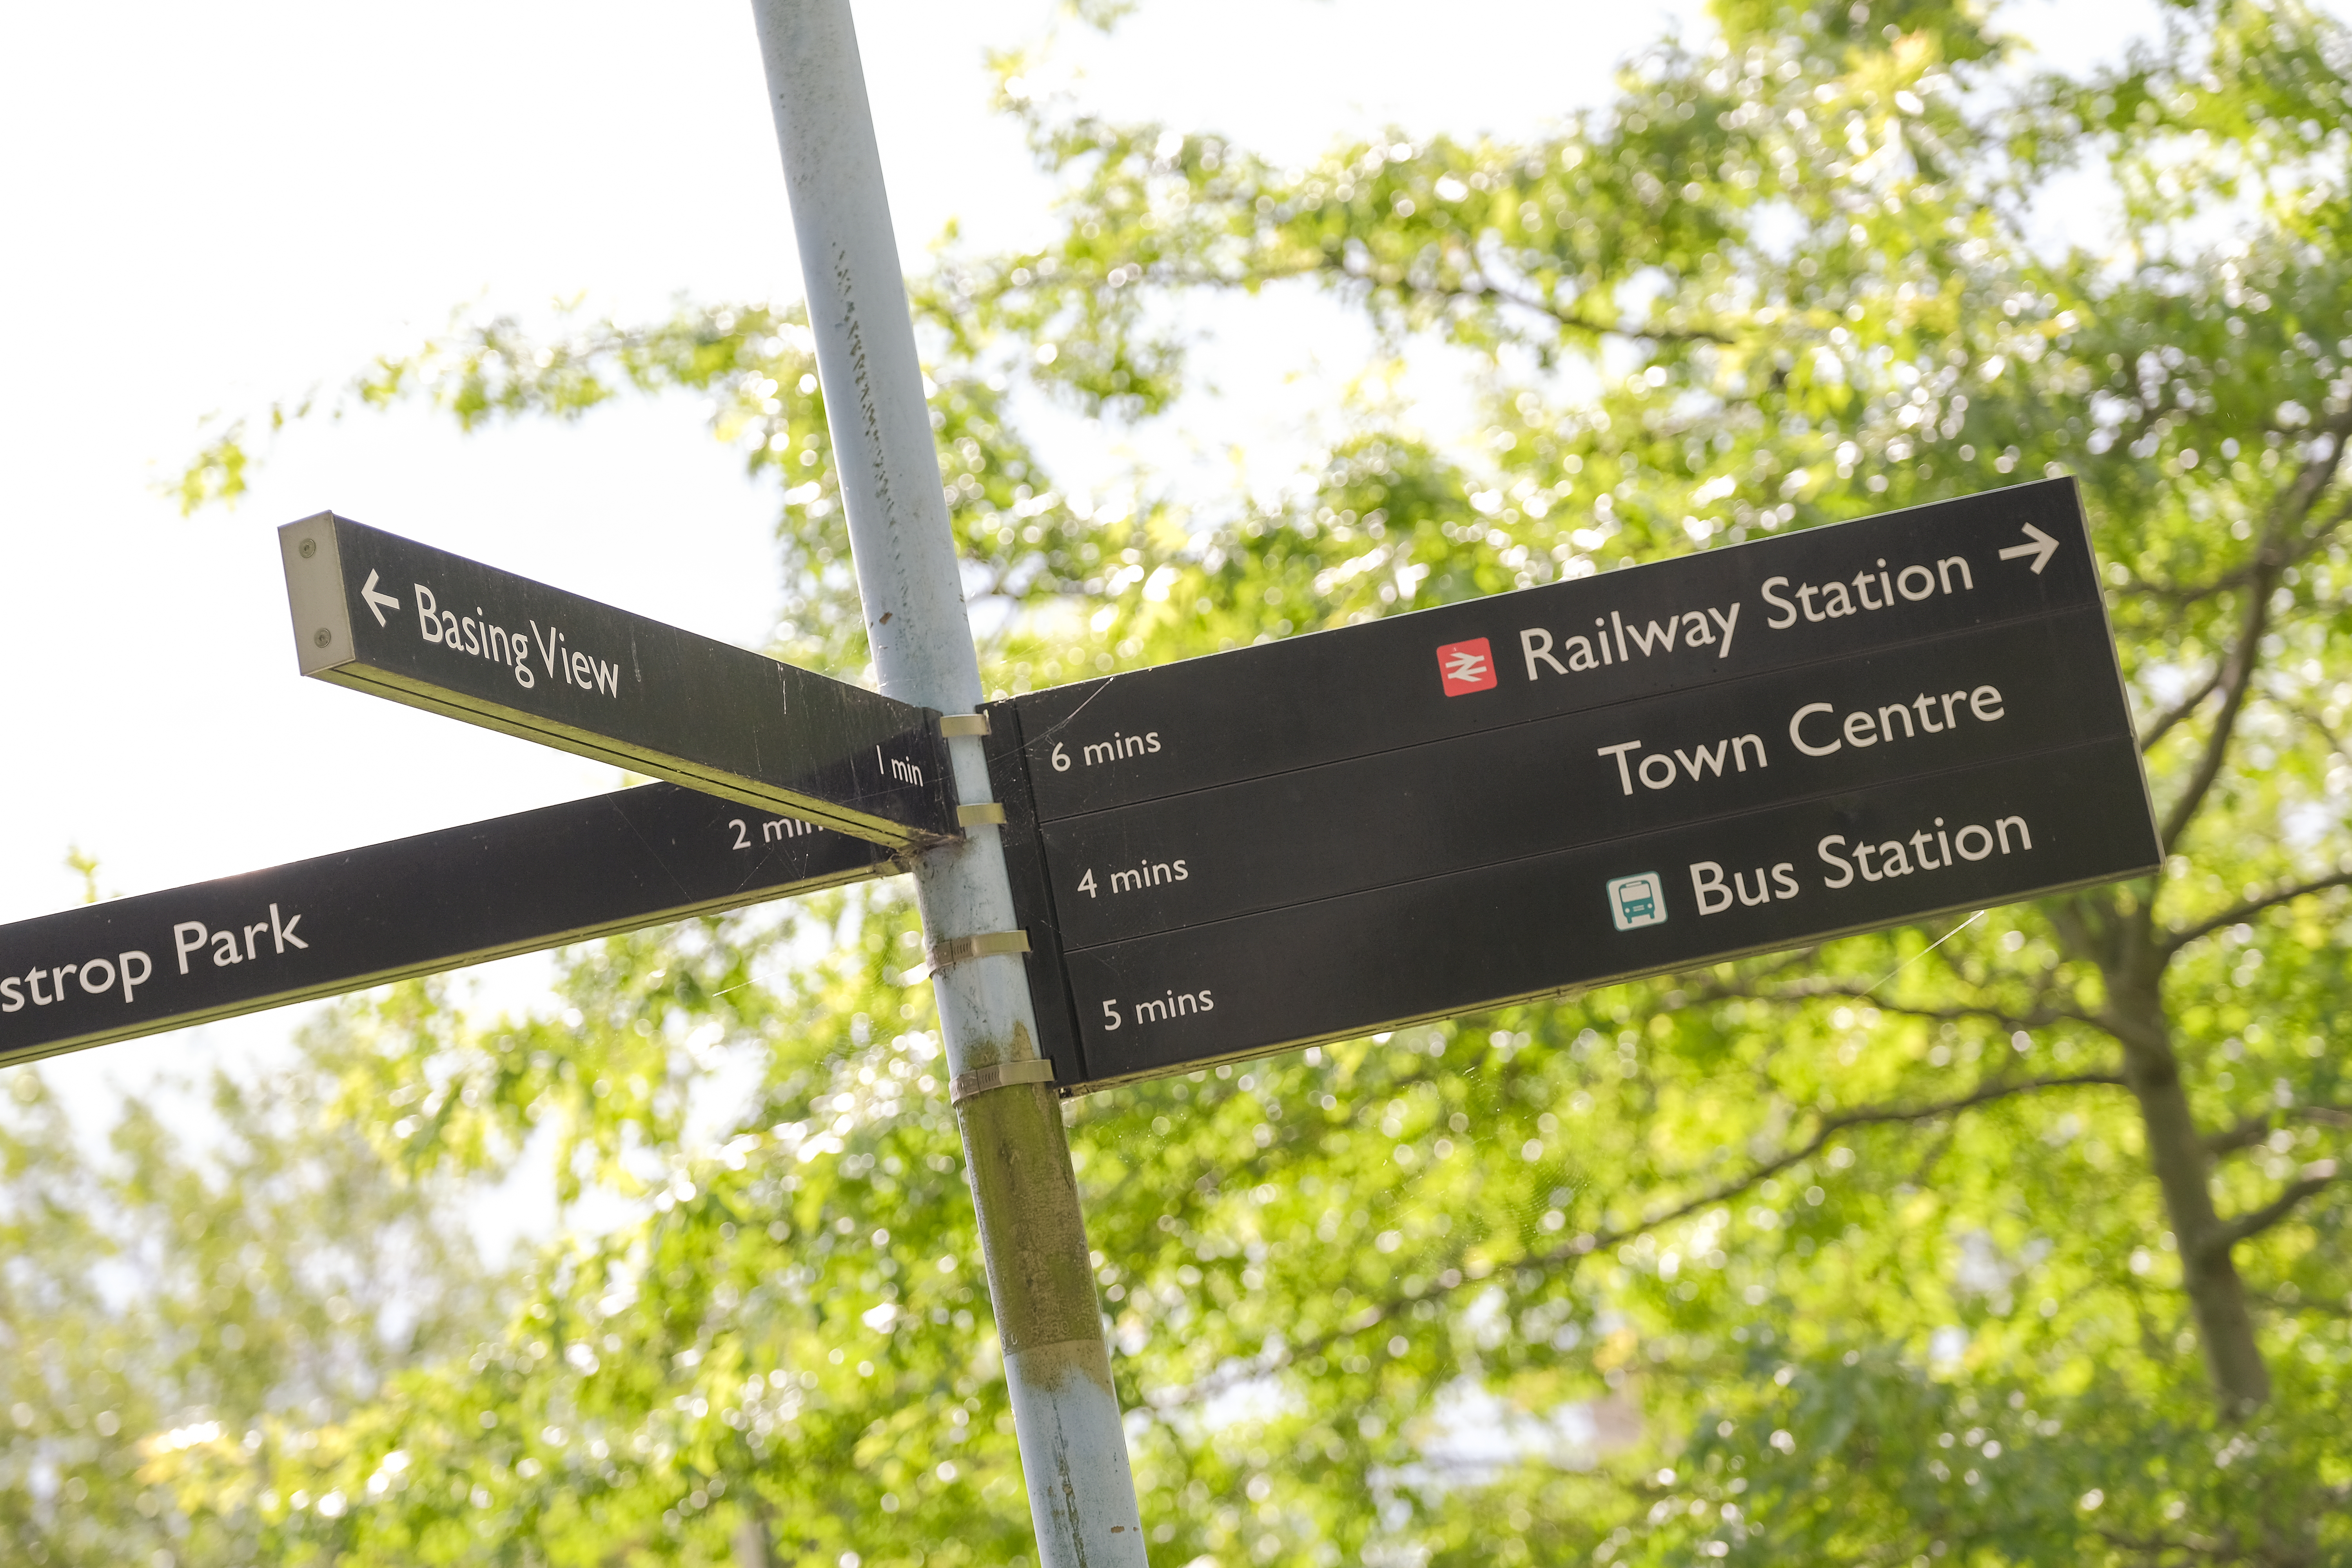 A sign post showing the way to the Railway Station, Town Centre, Bus Station, Basing View and Eastrop Park.